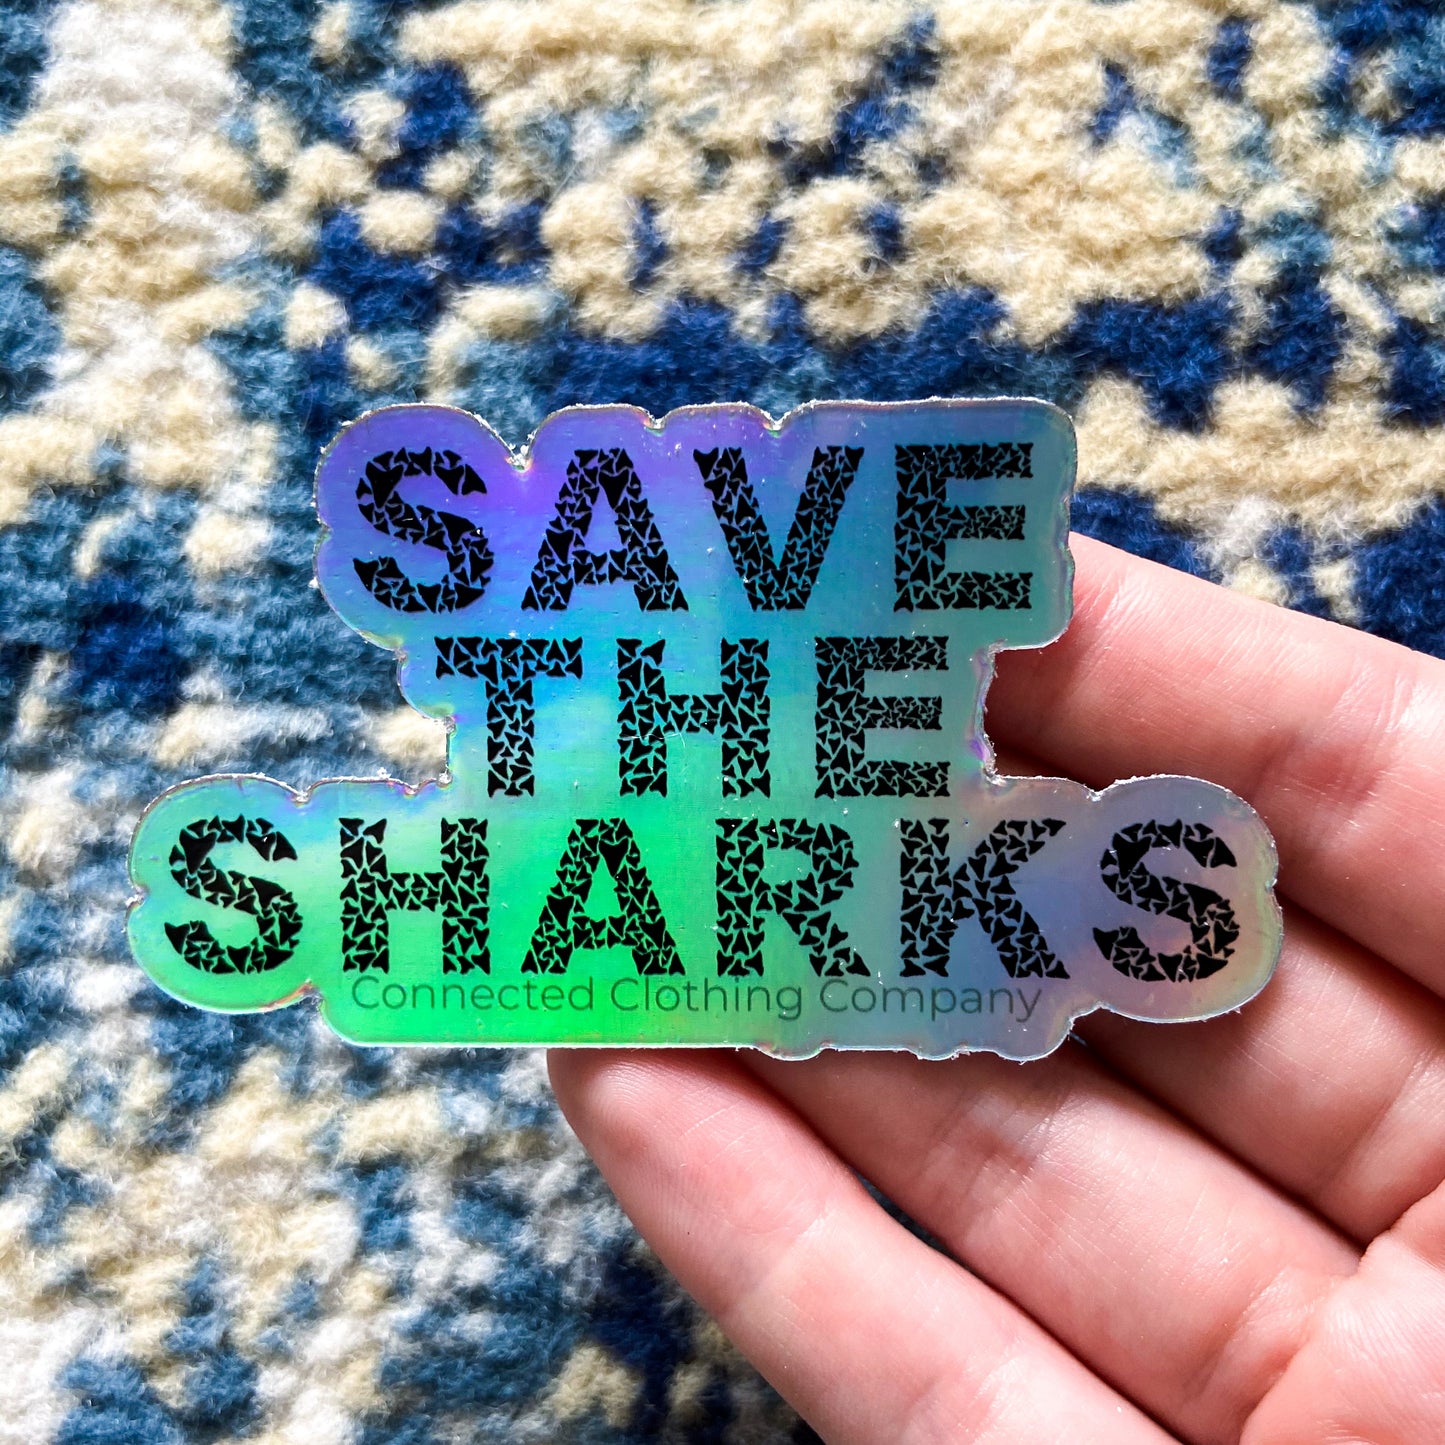 Holographic Save The Sharks Sticker - Connected Clothing Company - 10% of profits donated to Oceana shark conservation